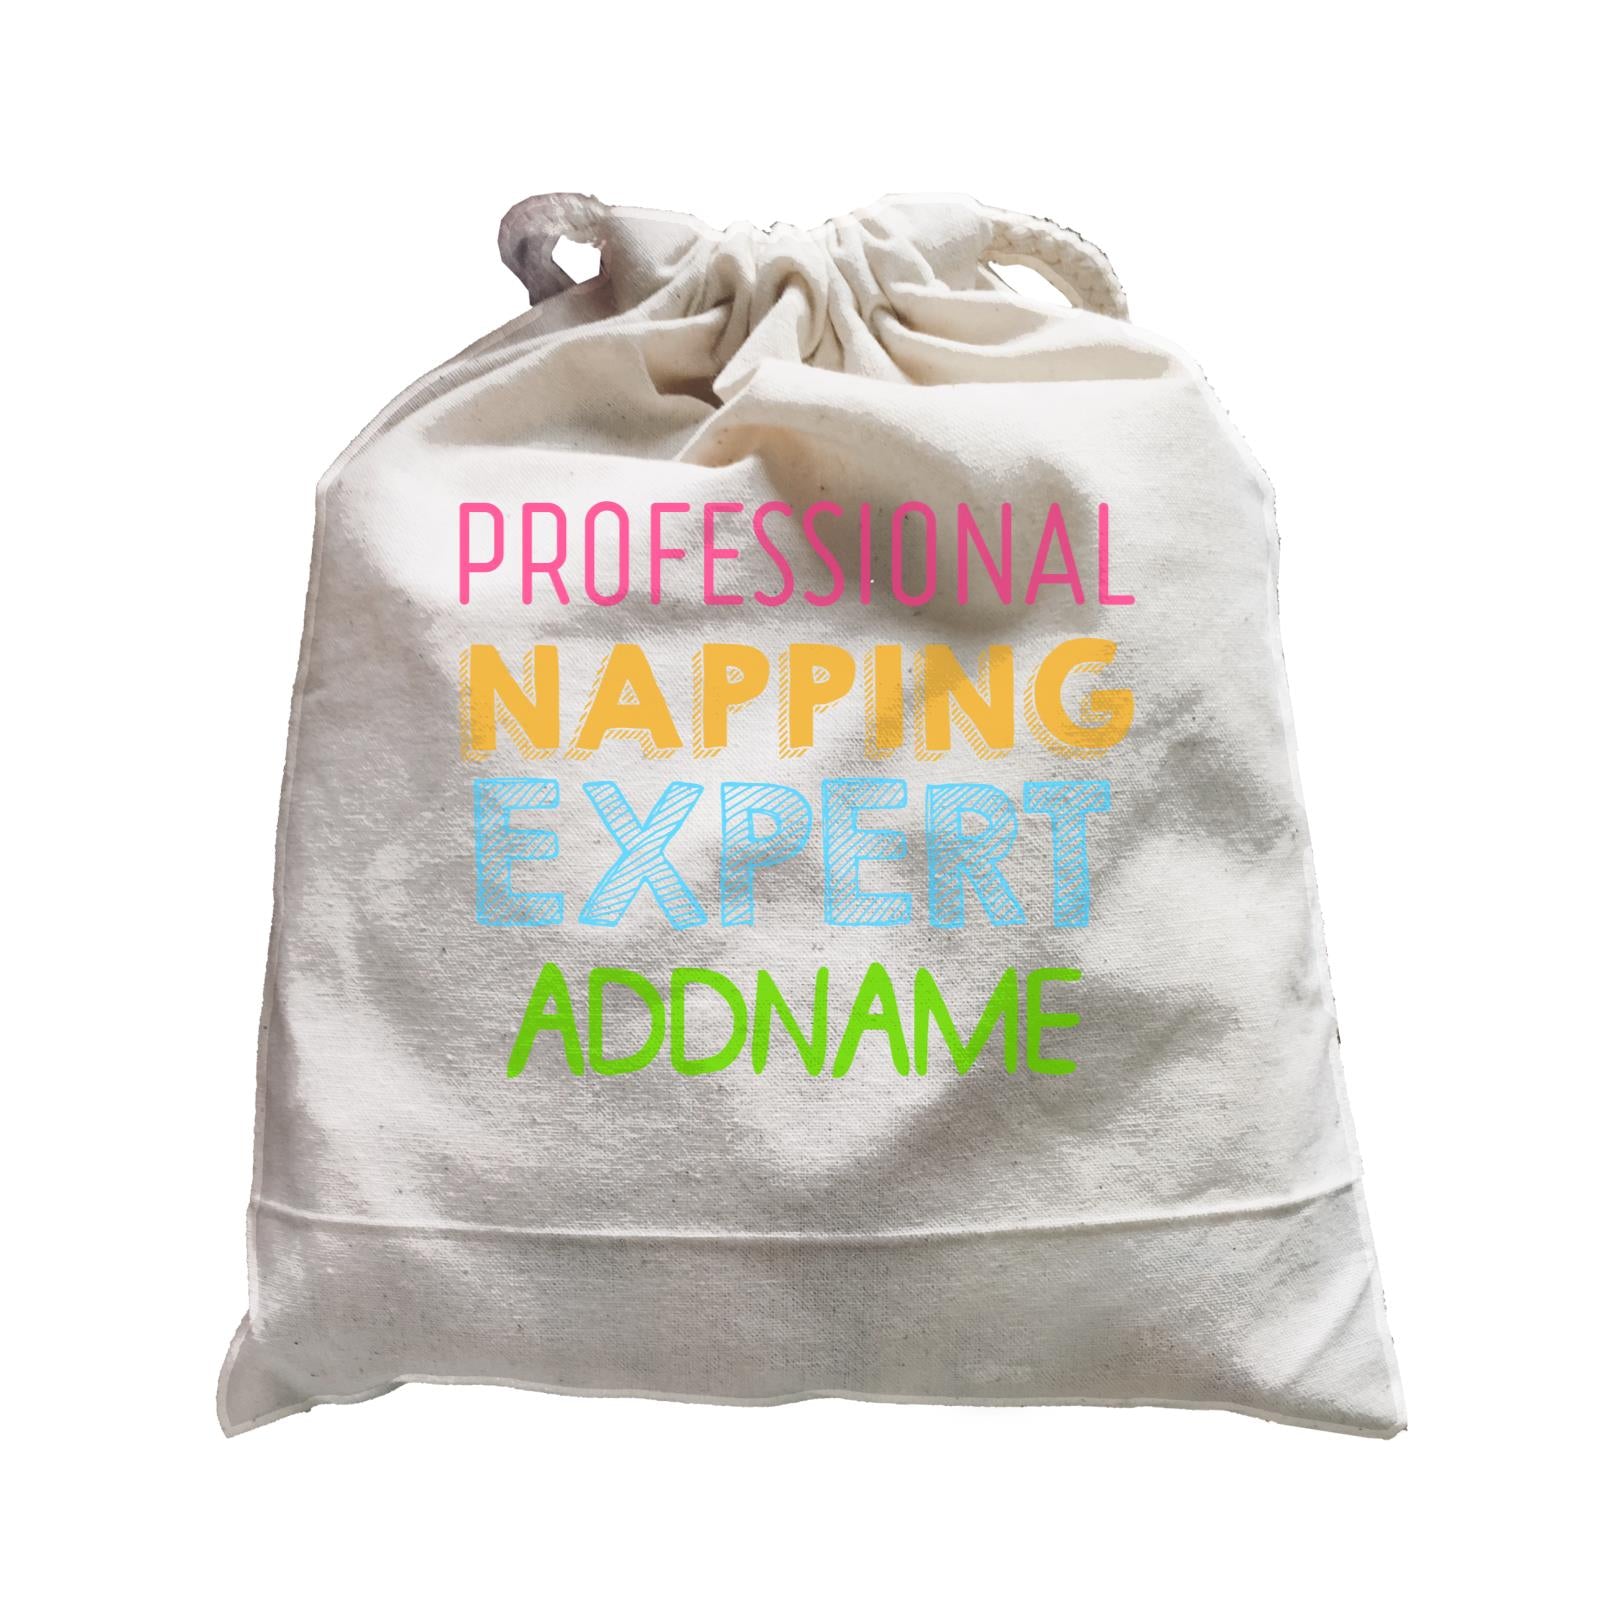 Professional Napping Expert Addname Satchel